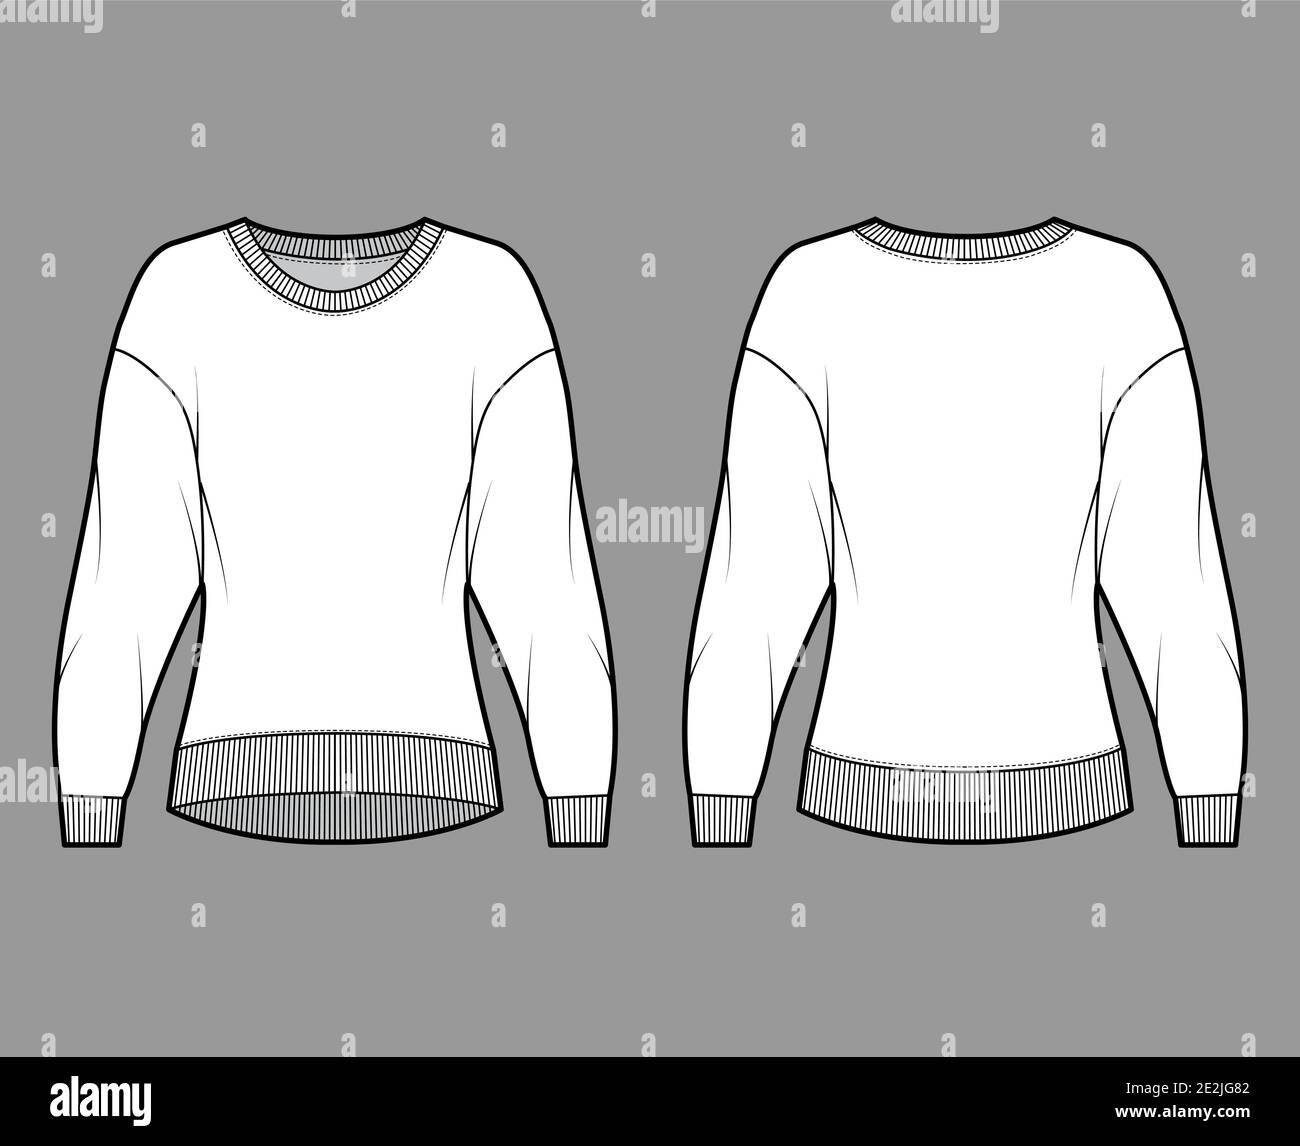 Cotton-terry sweatshirt technical fashion illustration with relaxed fit, crew neckline, long sleeves. Flat outwear jumper apparel template front, back, white color. Women, men, unisex top CAD mockup Stock Vector